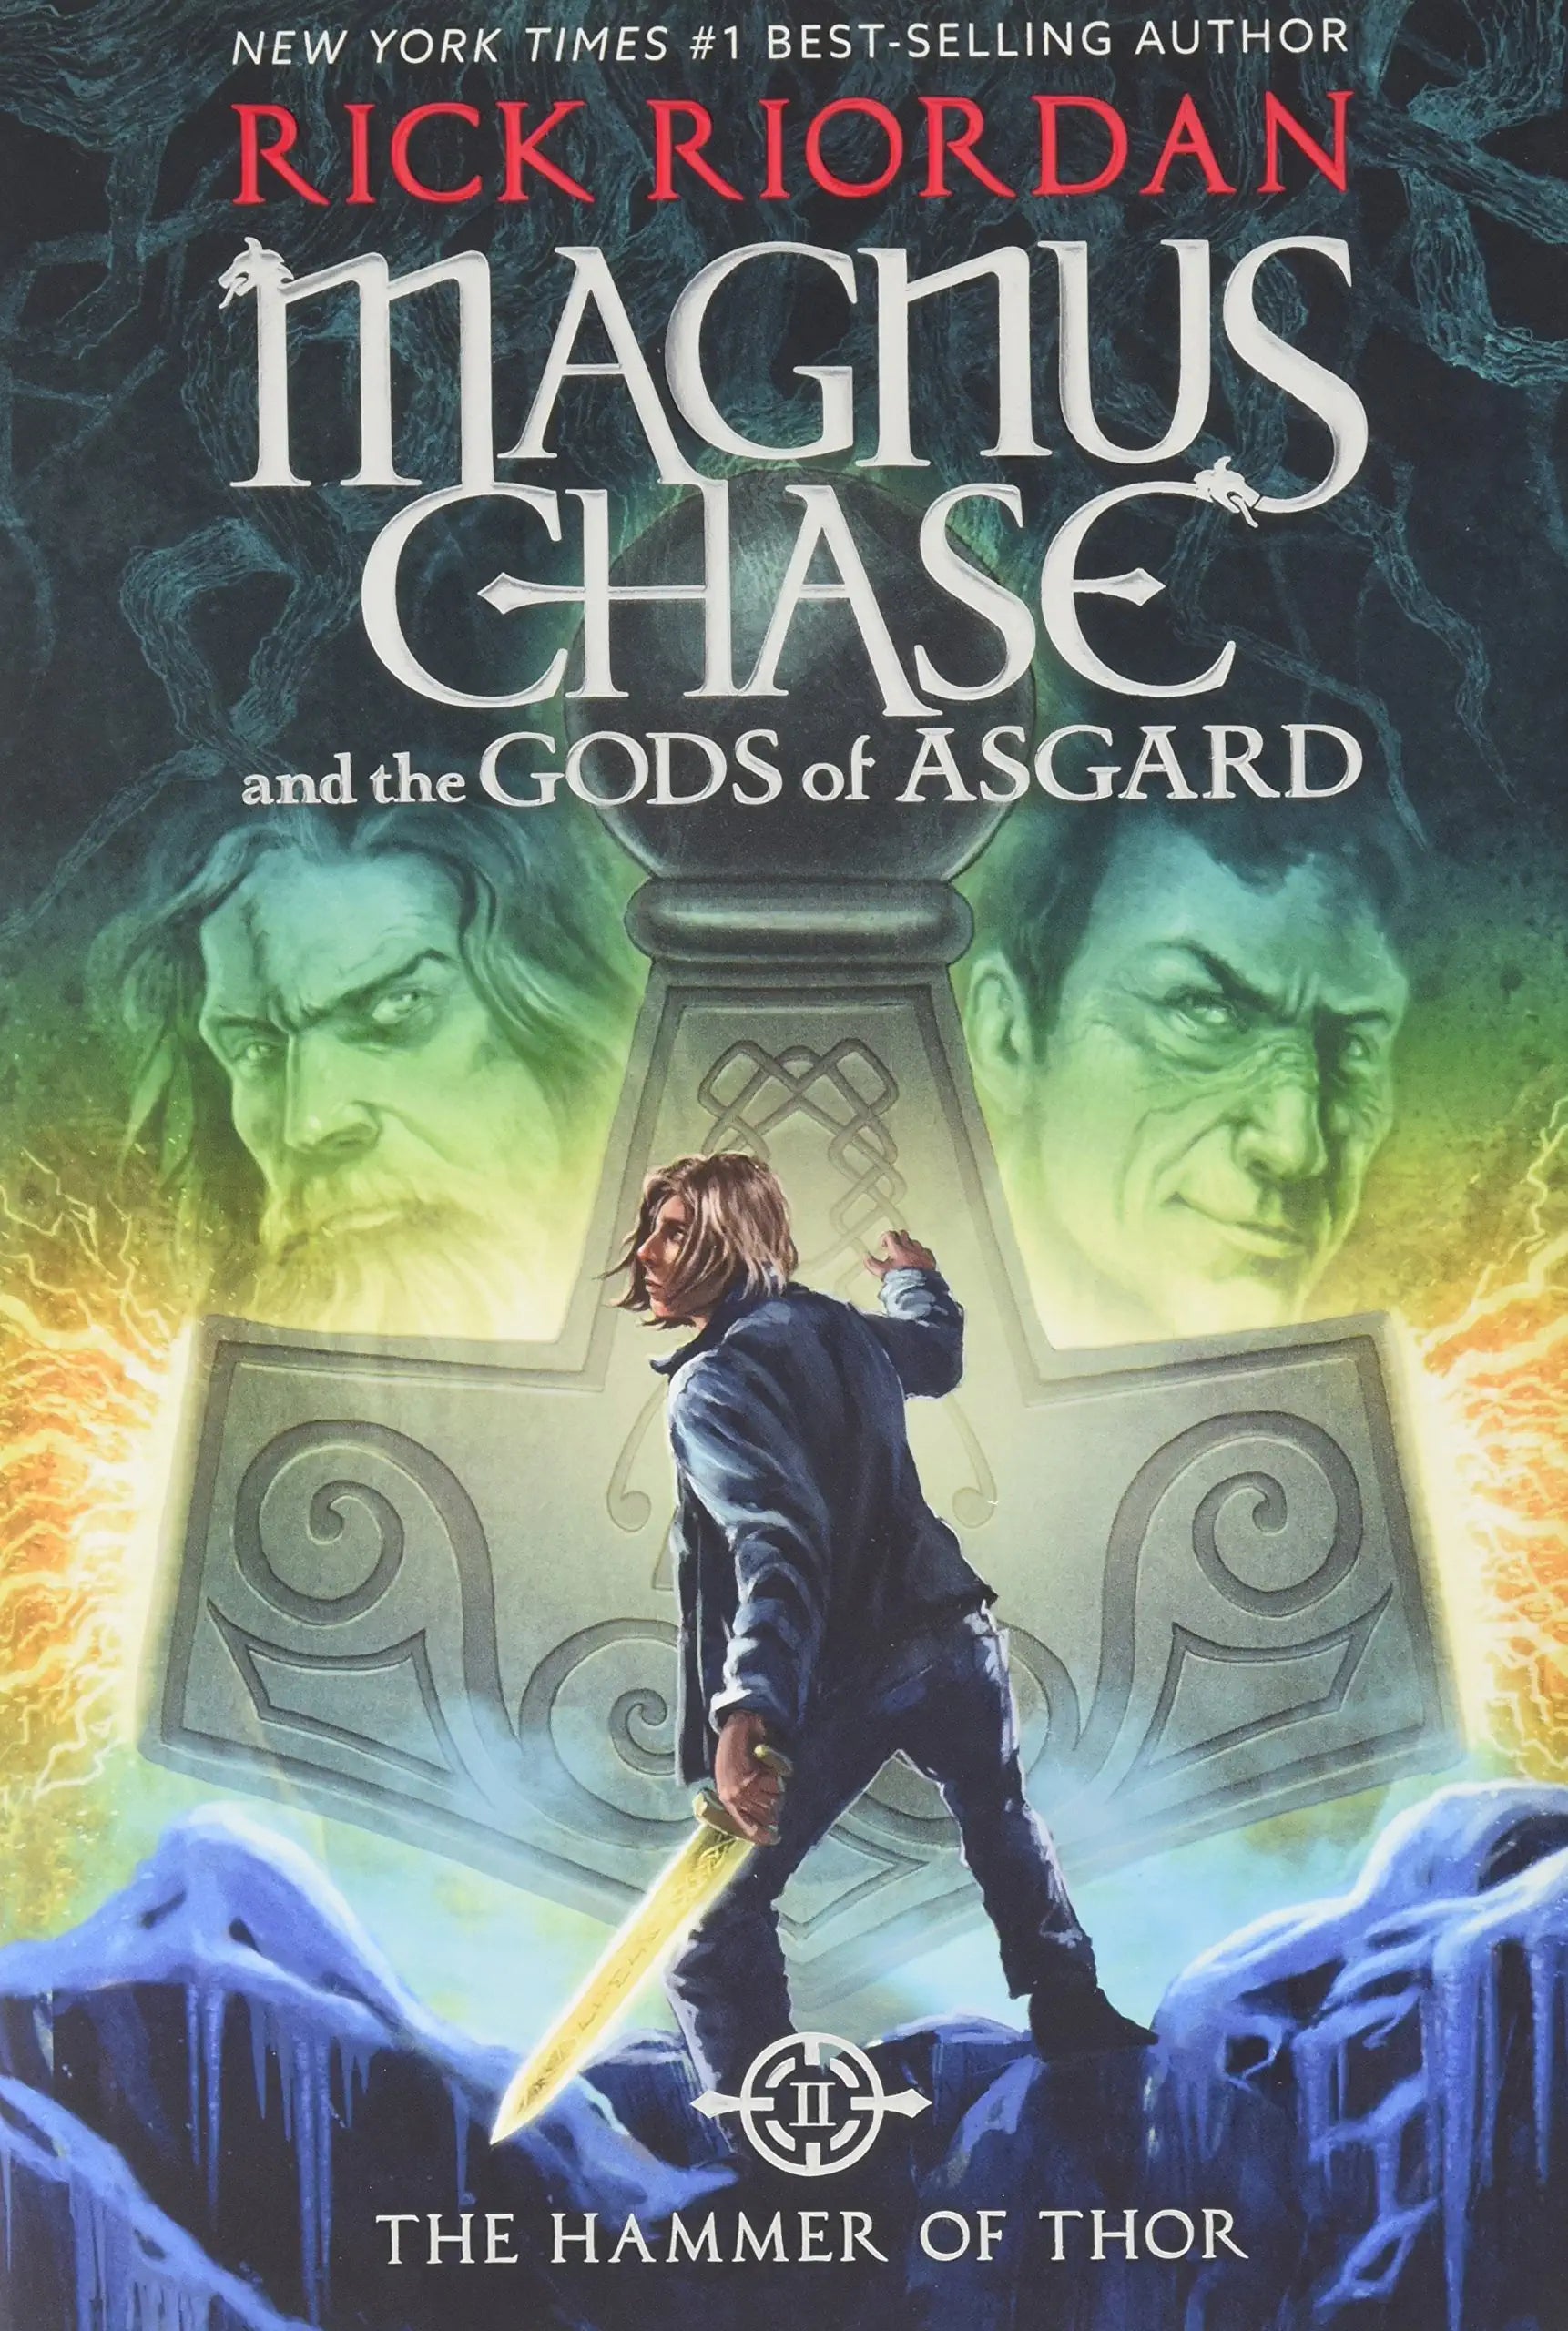 The Hammer of Thor (Magnus Chase and the Gods of Asgard Book 2) by Rick Riordan [Hardcover] - LV'S Global Media